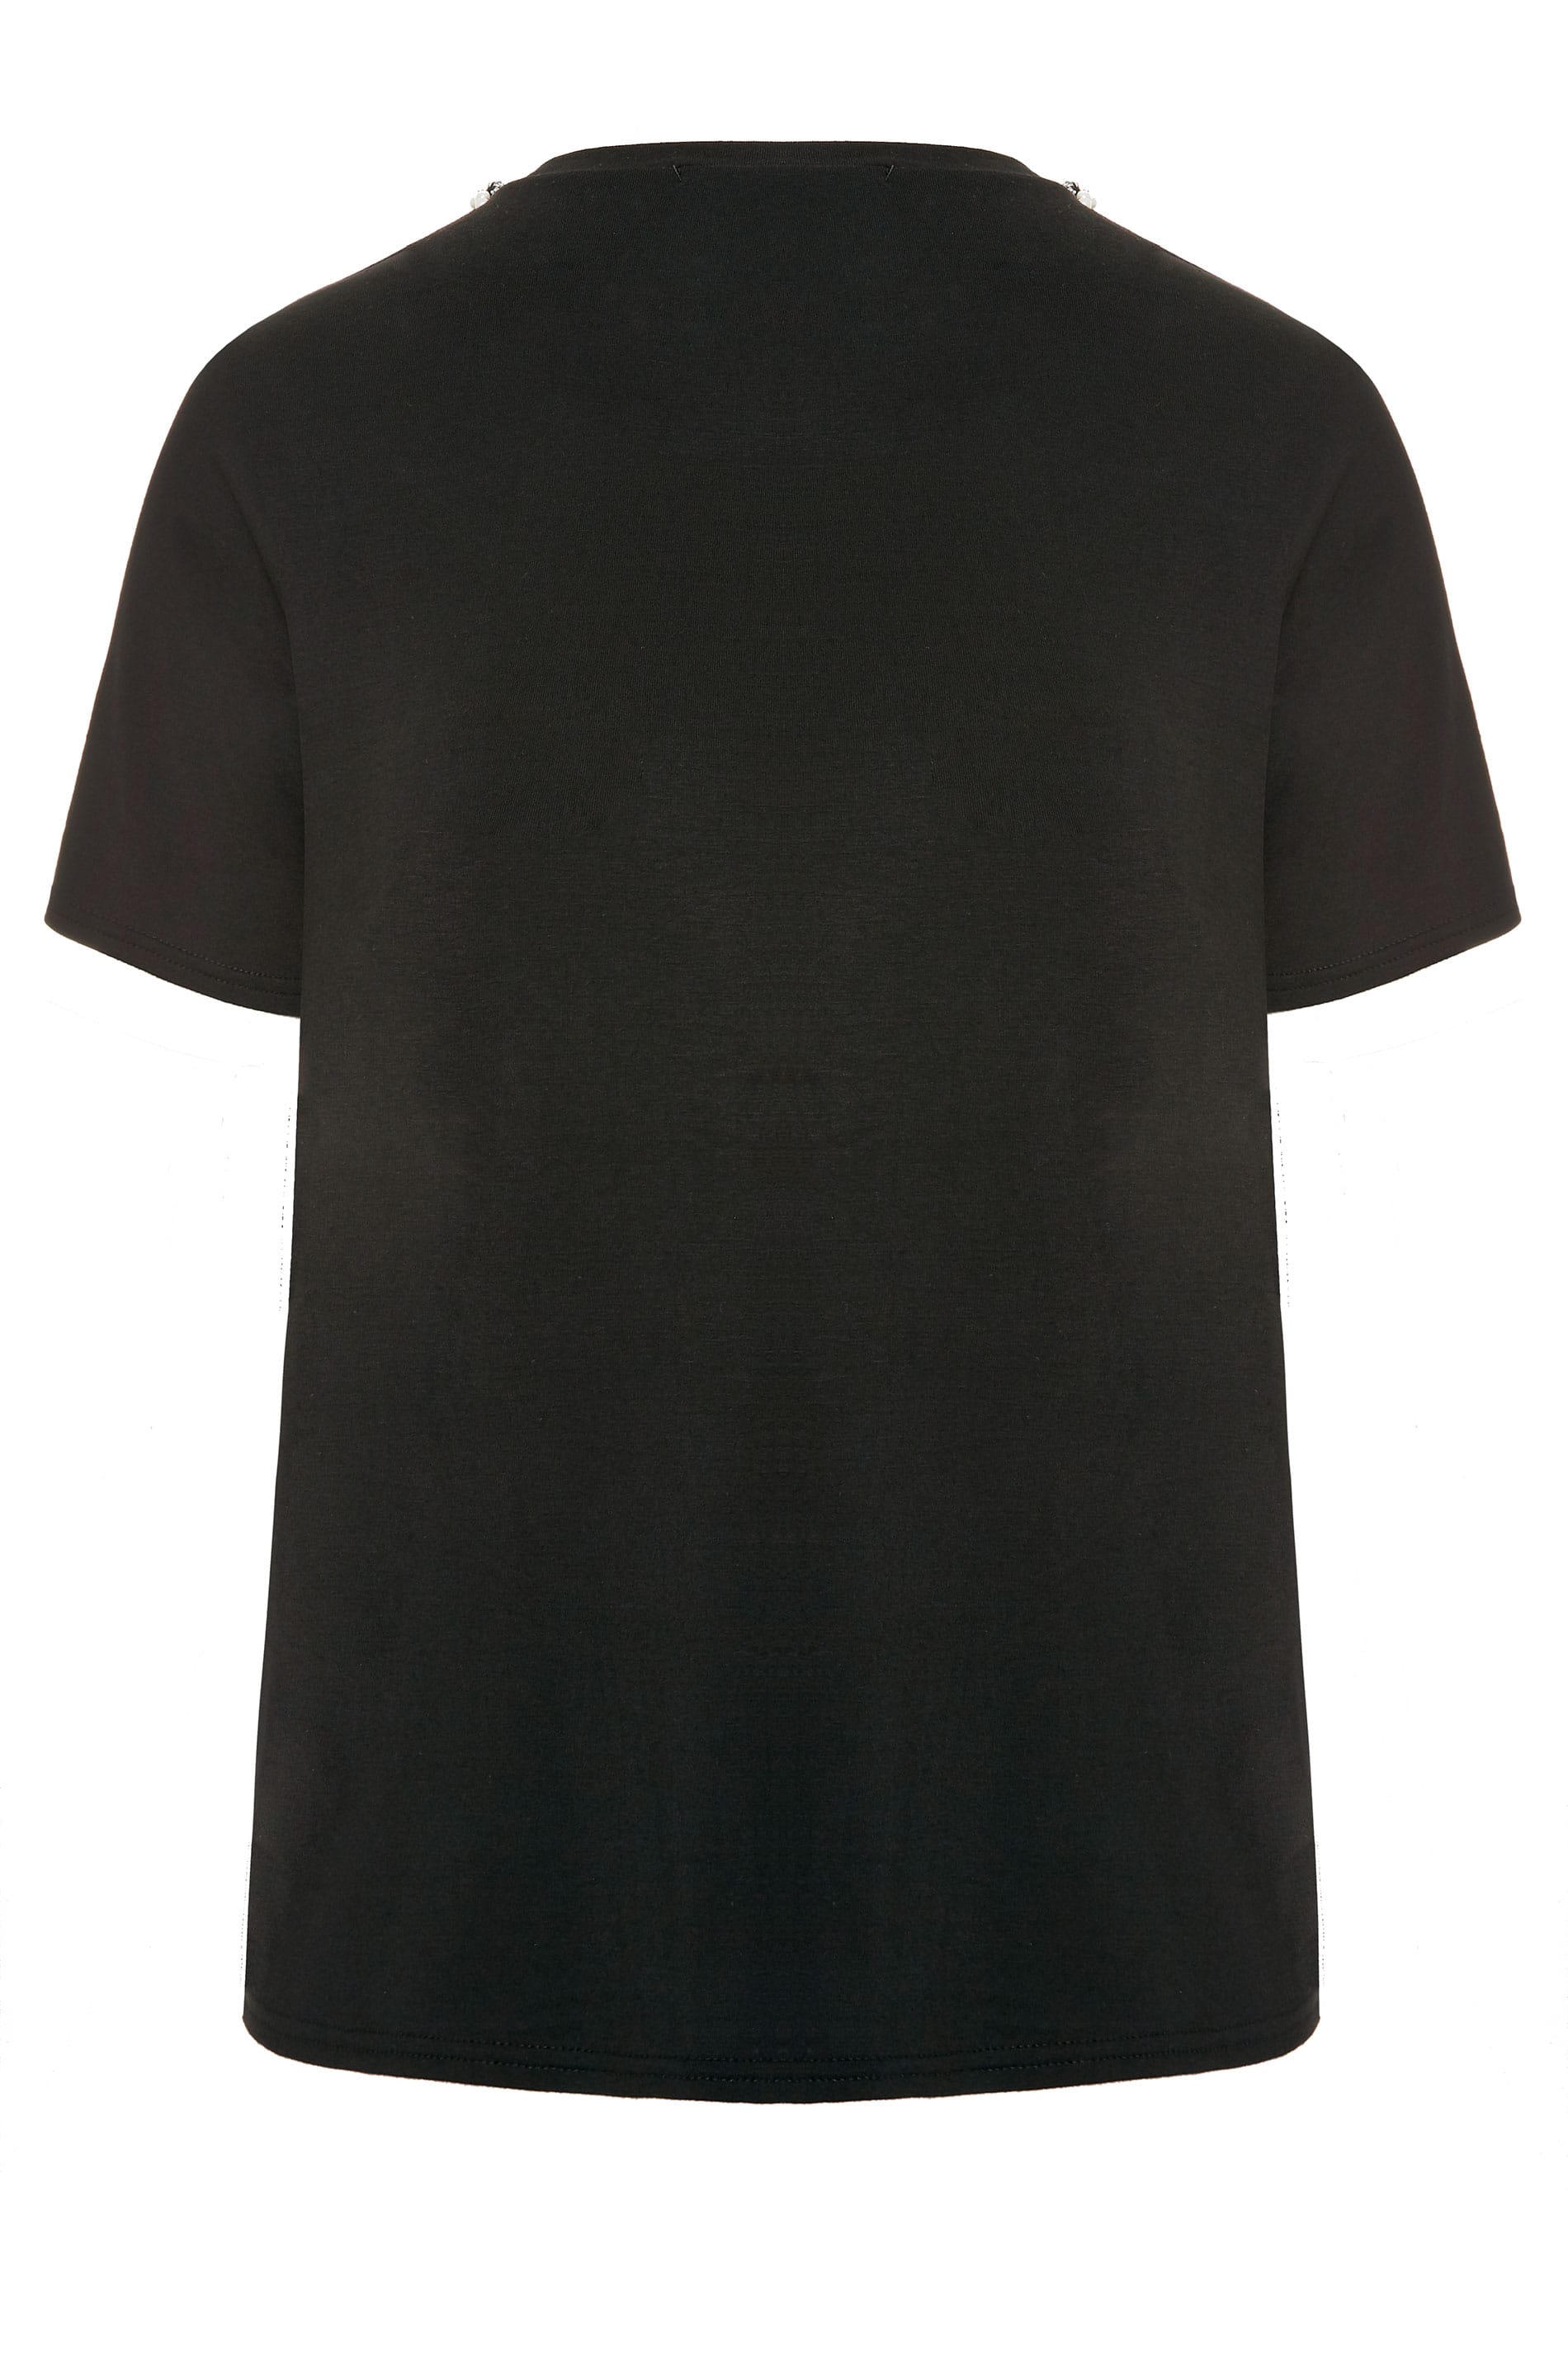 LIMITED COLLECTION Black Pearl Trim T-Shirt | Yours Clothing